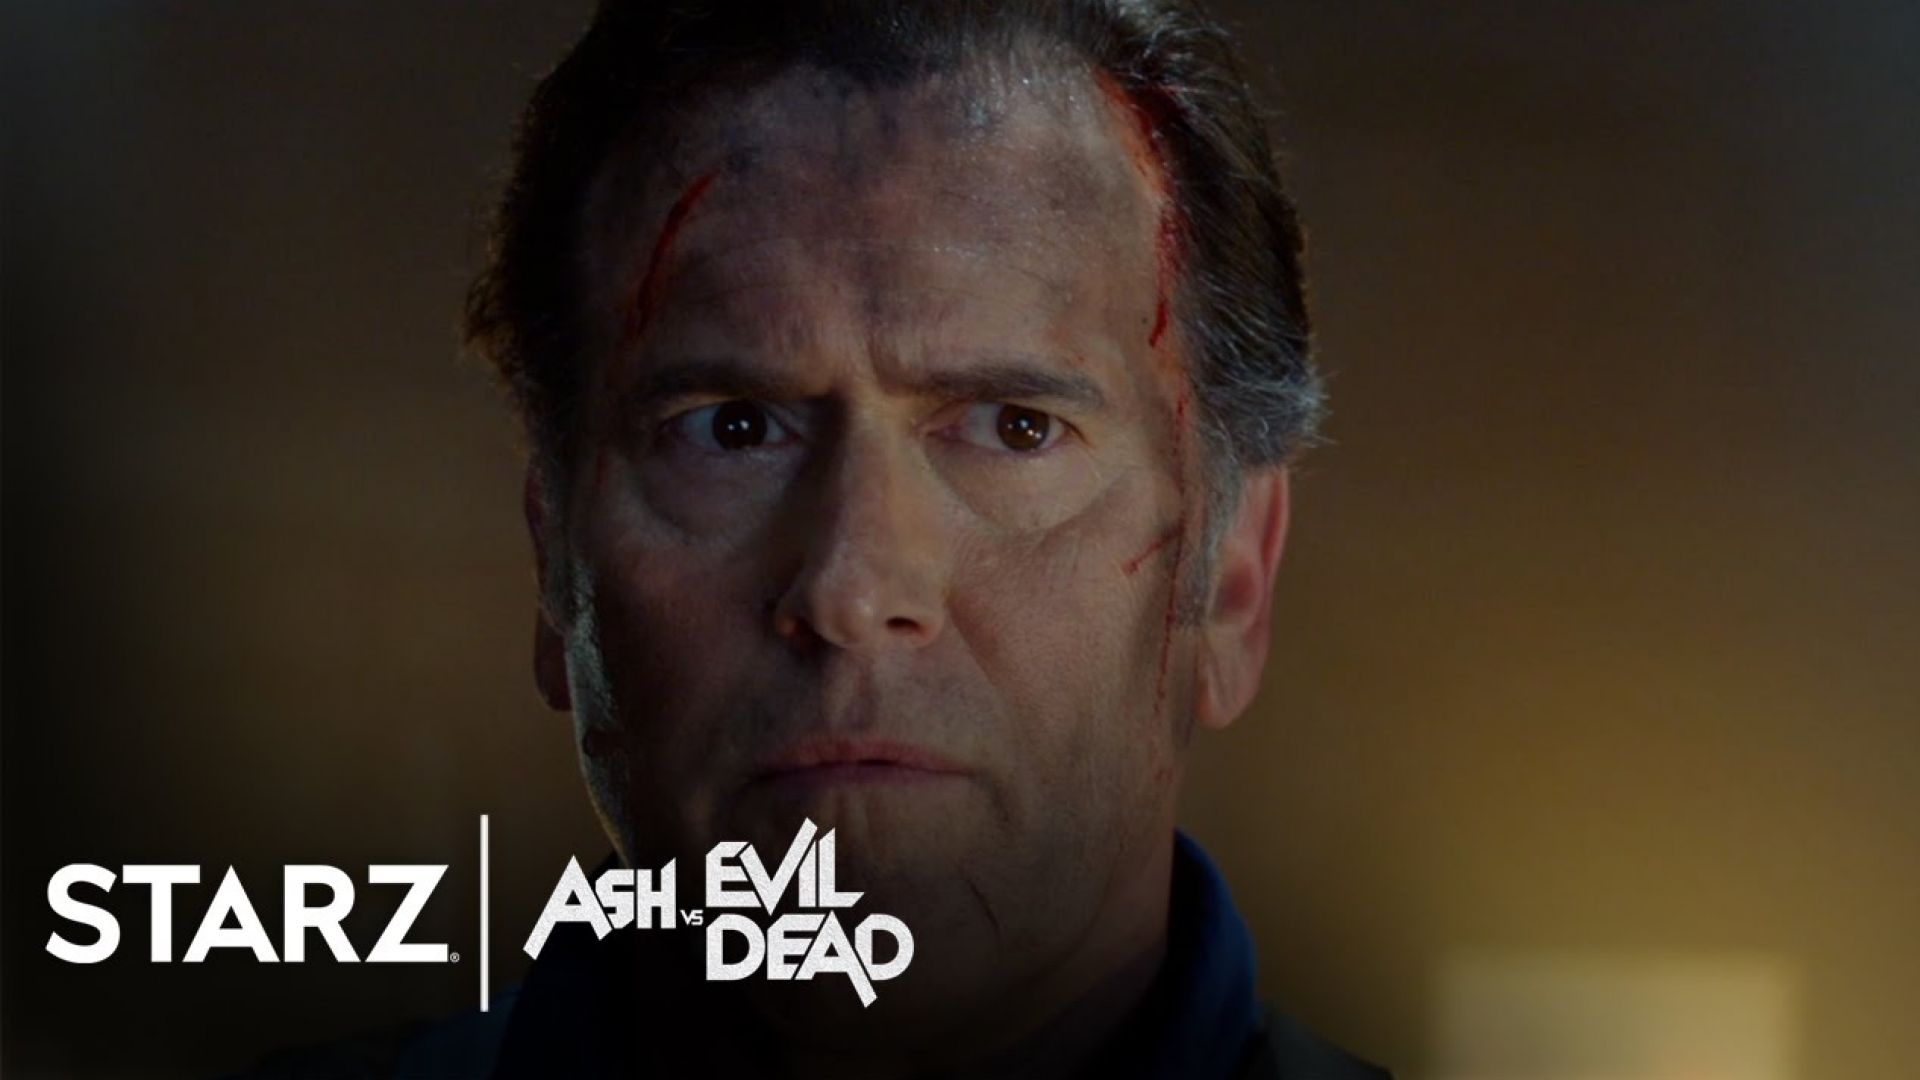 The trailer for season 2 of Ash vs Evil Dead was Deemed to G